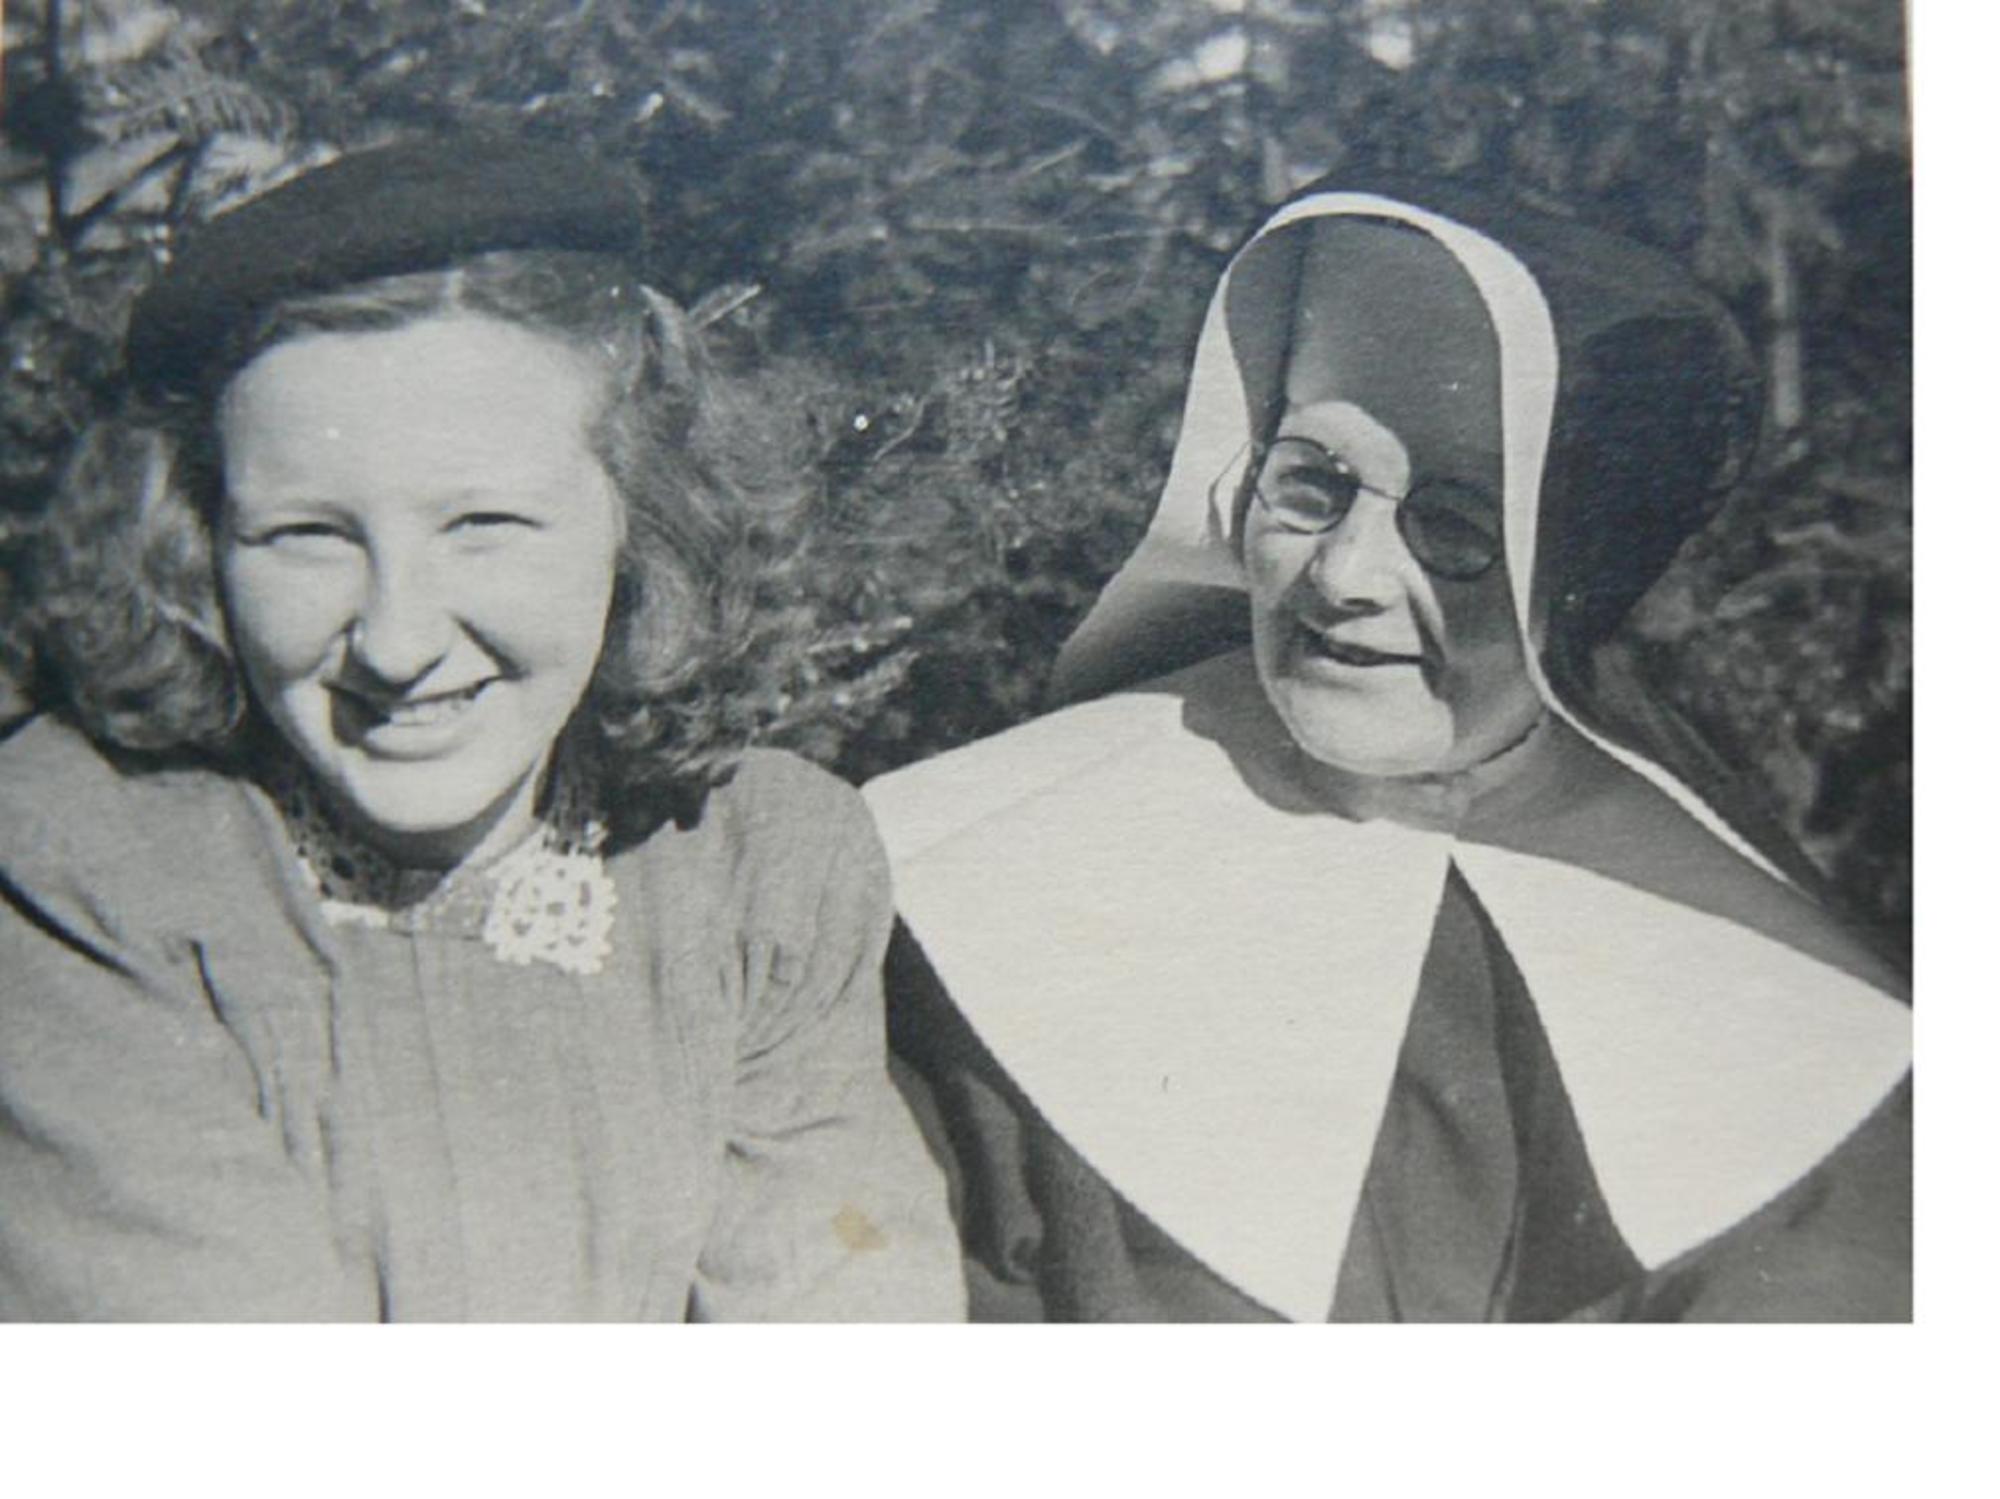 Sister Richardis with her aunt during the war